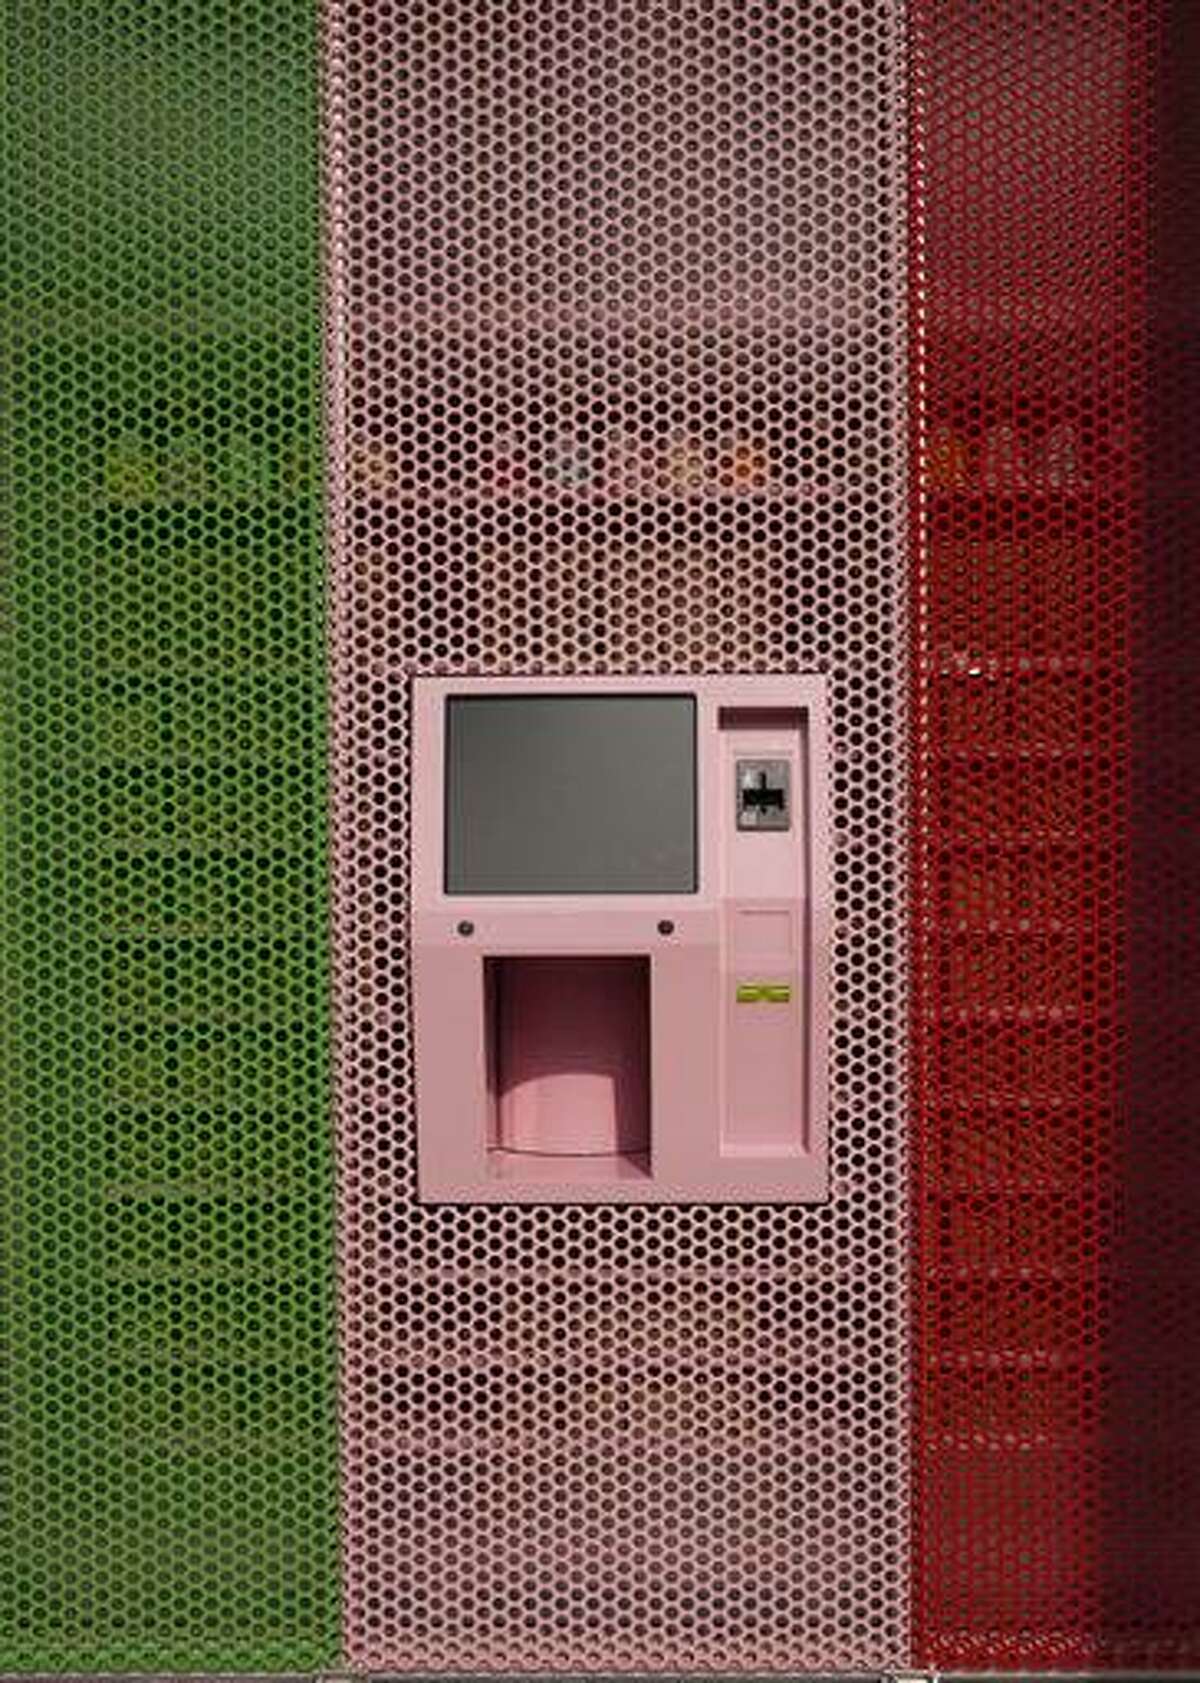 A new 24-hour cupcake "ATM," an automatic machine that will be continuously be restocked to dispense fresh cupcakes is seen at Sprinkles Cupcakes in Beverly Hills, Calif. The machine features a touchscreen and a robotic arm that pulls the right flavored cupcake from a wall of single-serving boxes inside the store. Associated Press